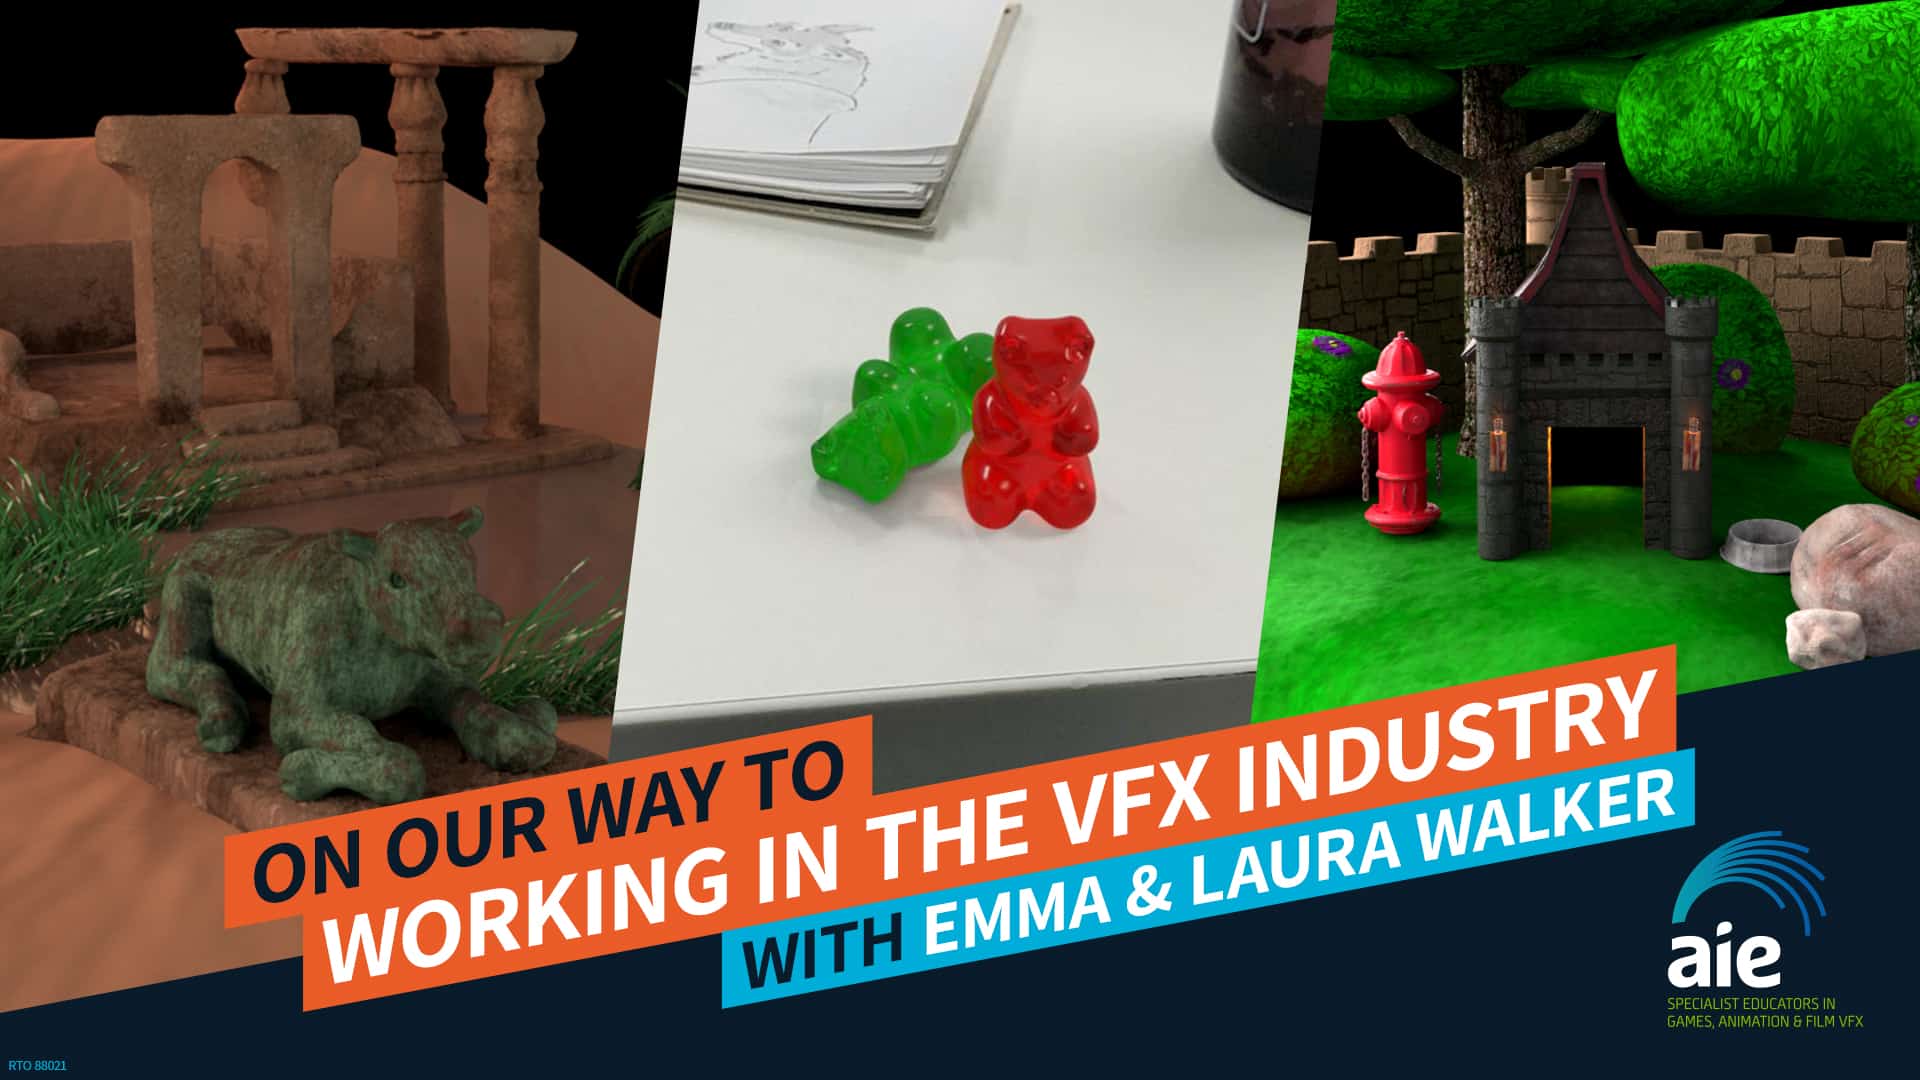 On our way to working in the VFX industry – Emma and Laura Walker Feature Image | AIE Workshop